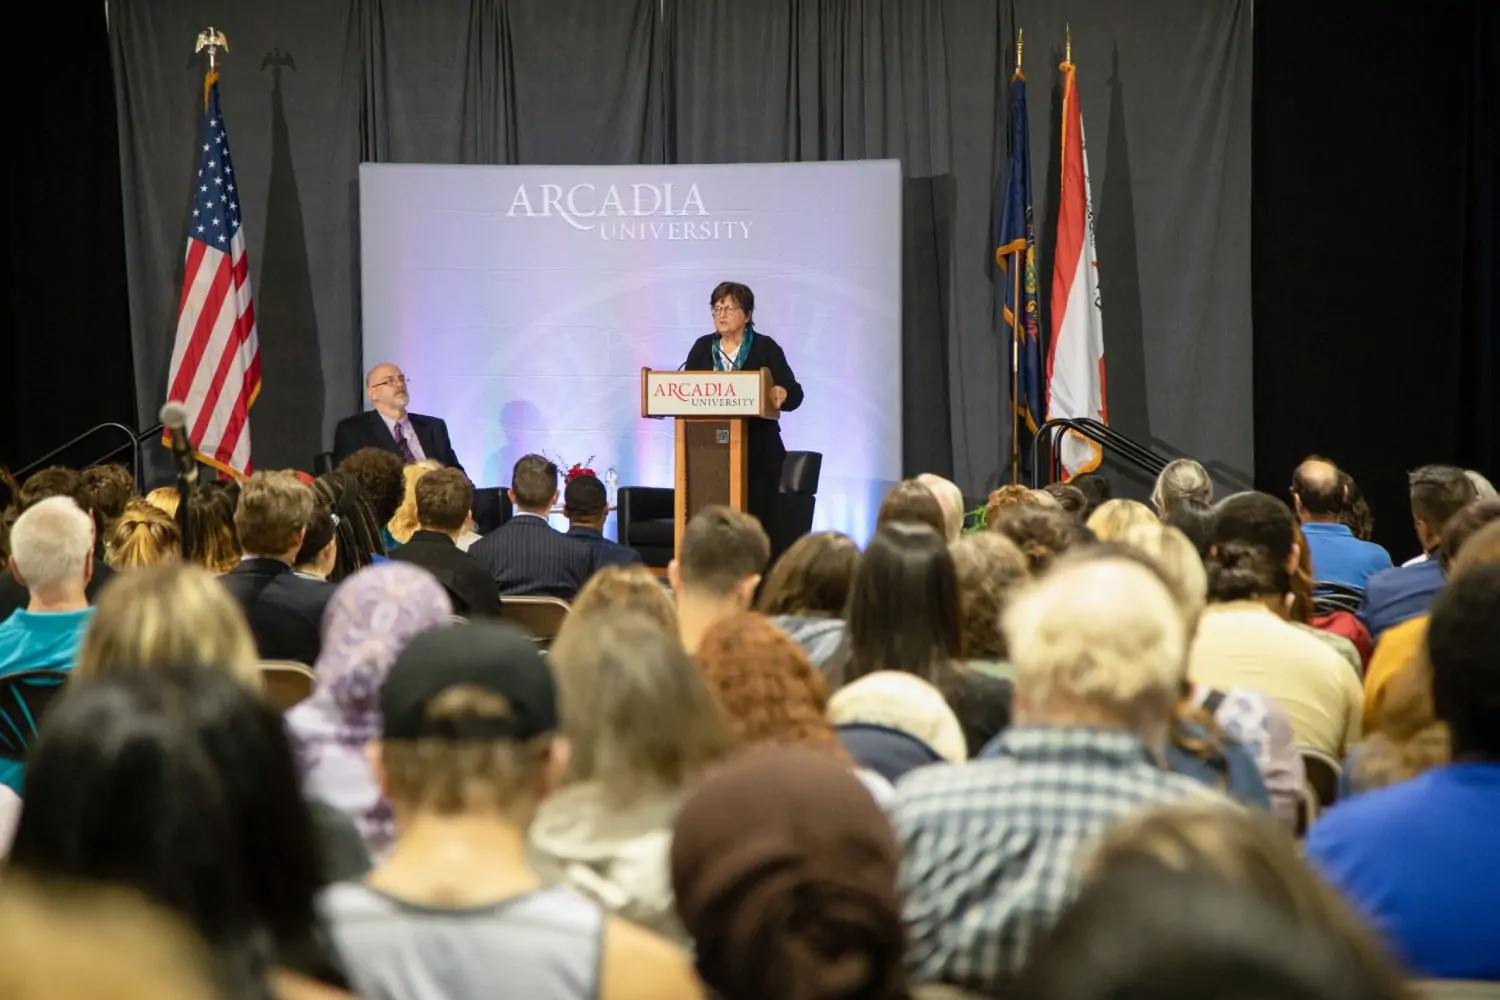 Sister Helen speaking at a podium about the common reads book